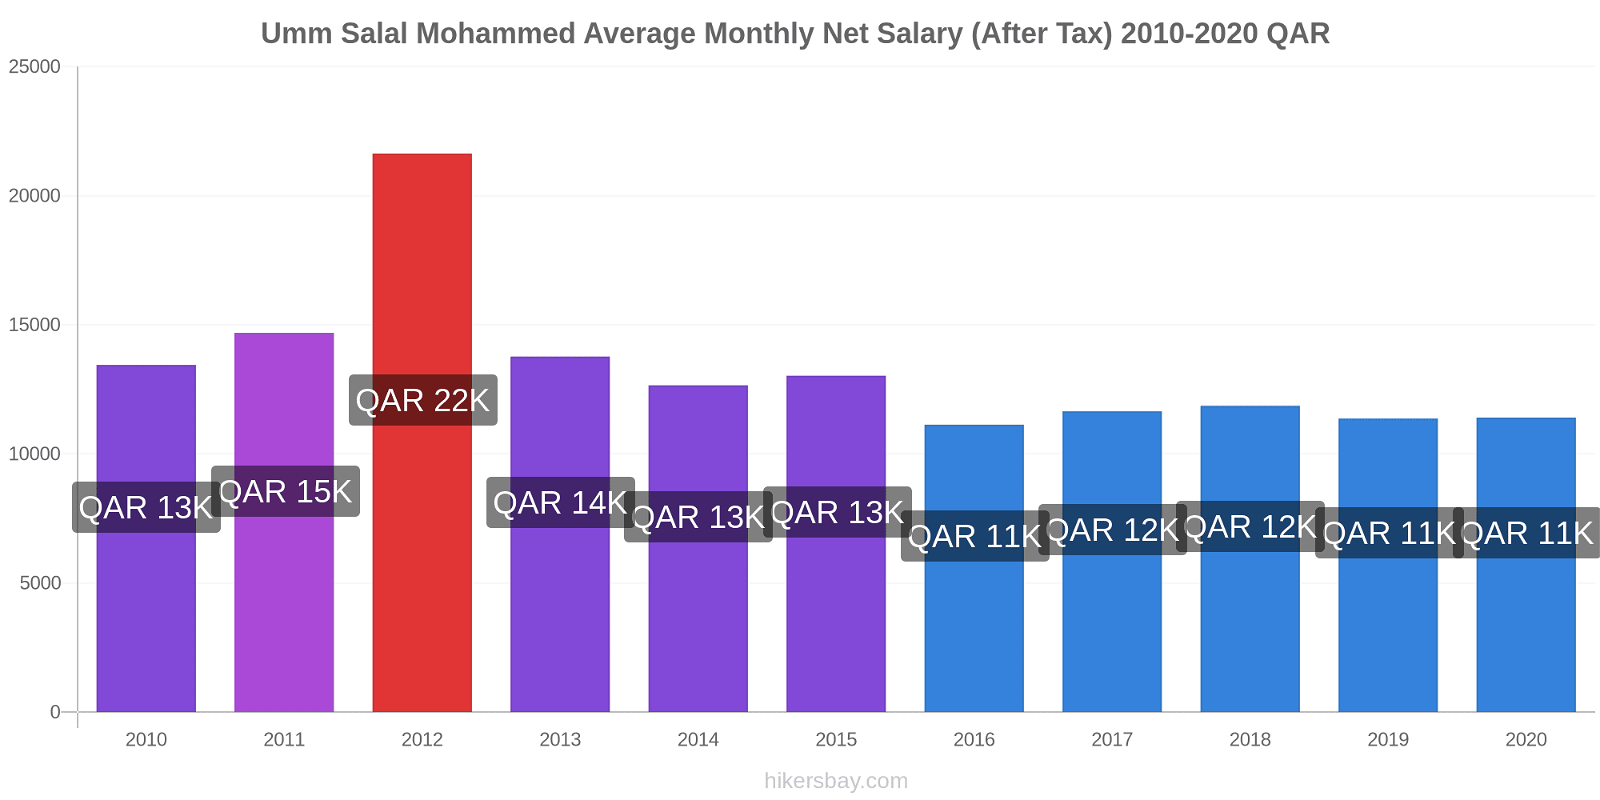 Umm Salal Mohammed price changes Average Monthly Net Salary (After Tax) hikersbay.com